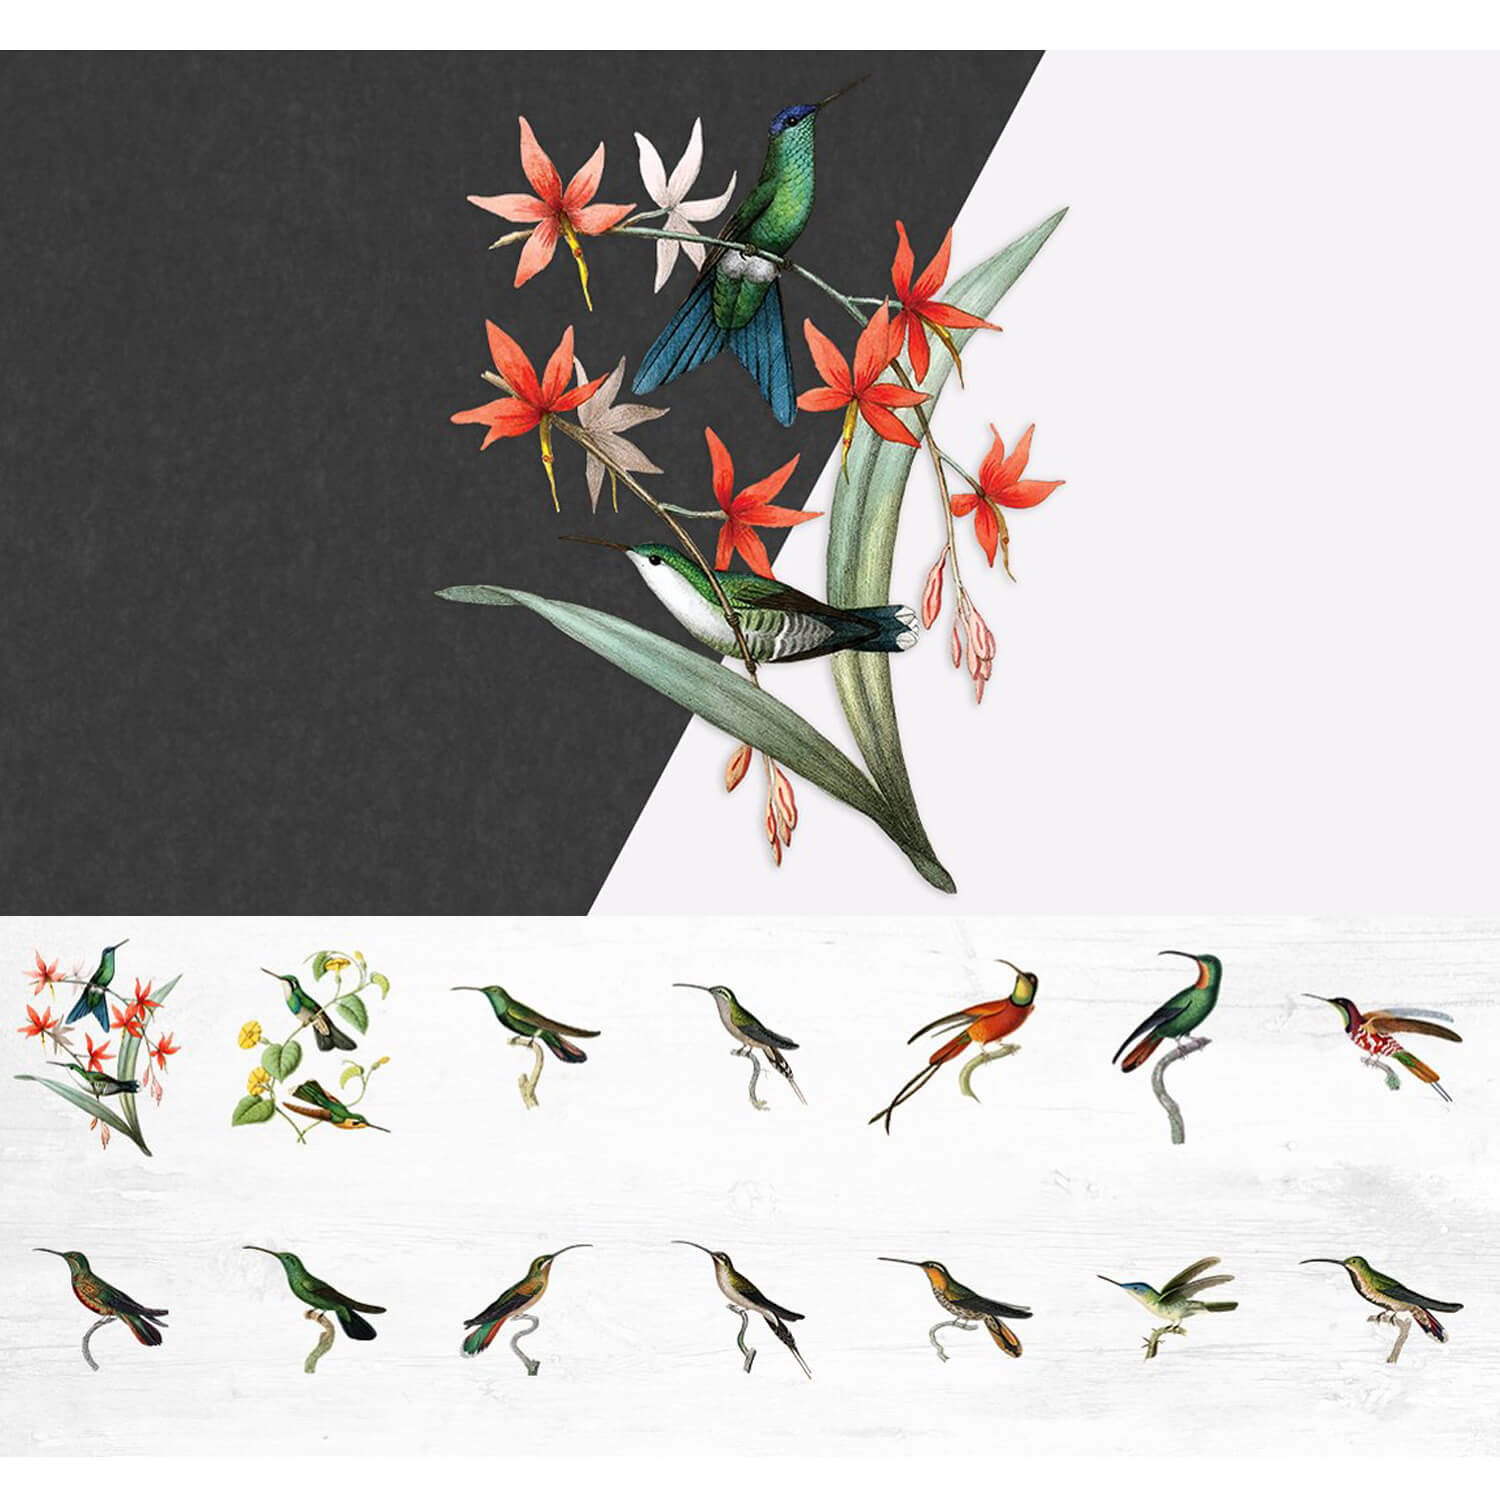 Hummingbirds with different colors on green branches with and without leaves and flowers.